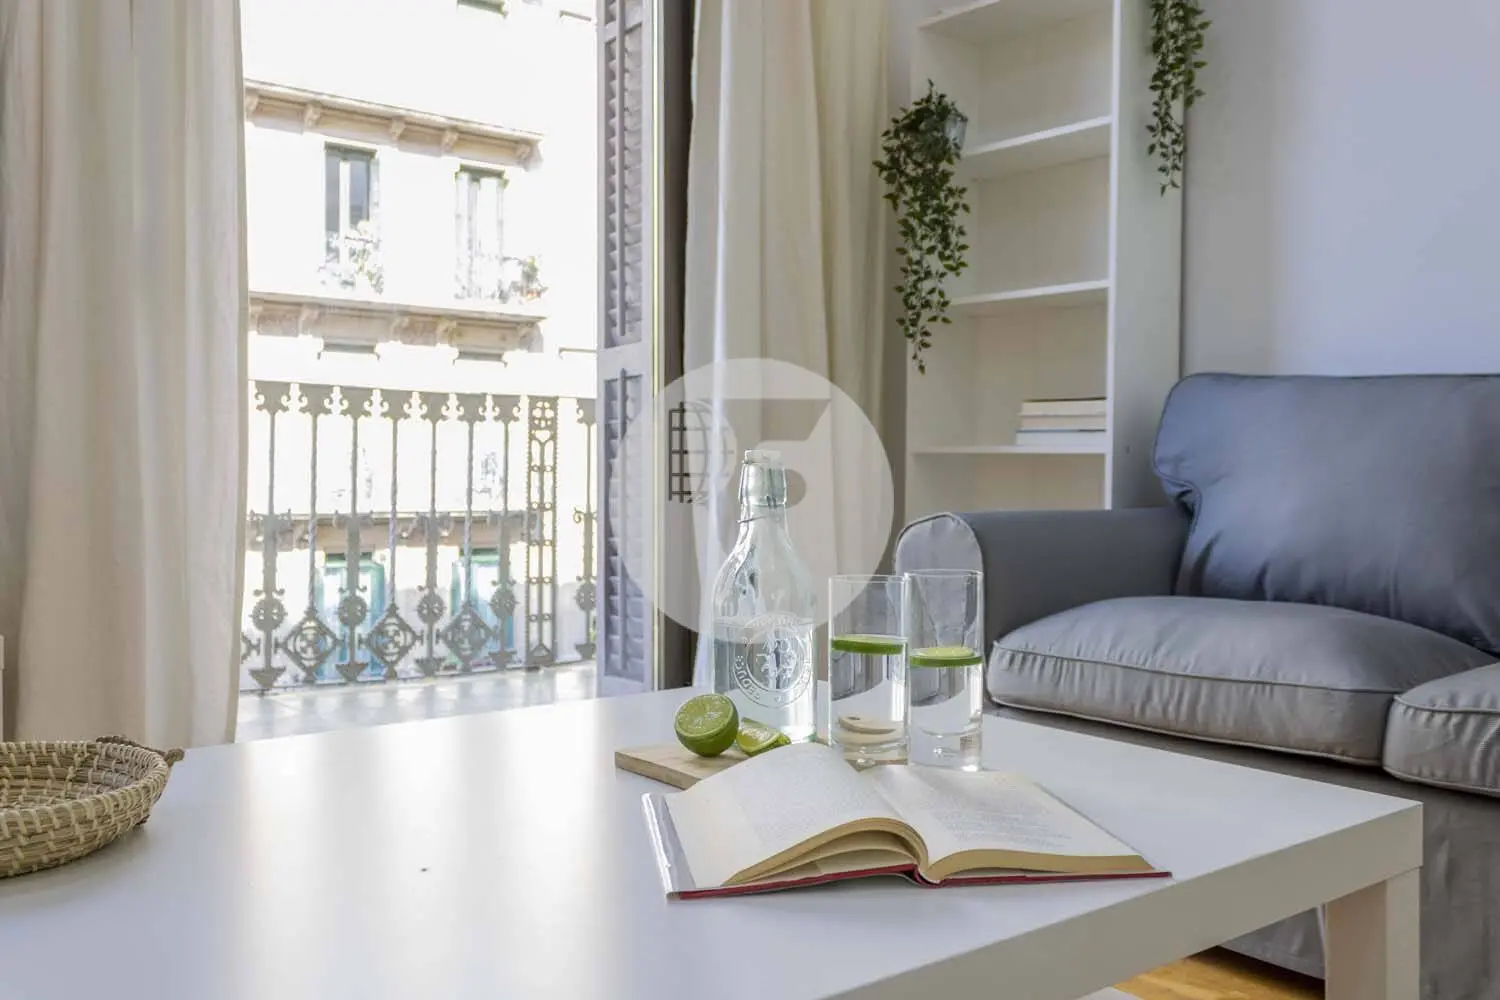 Furnished and equipped on Rosselló Street 33